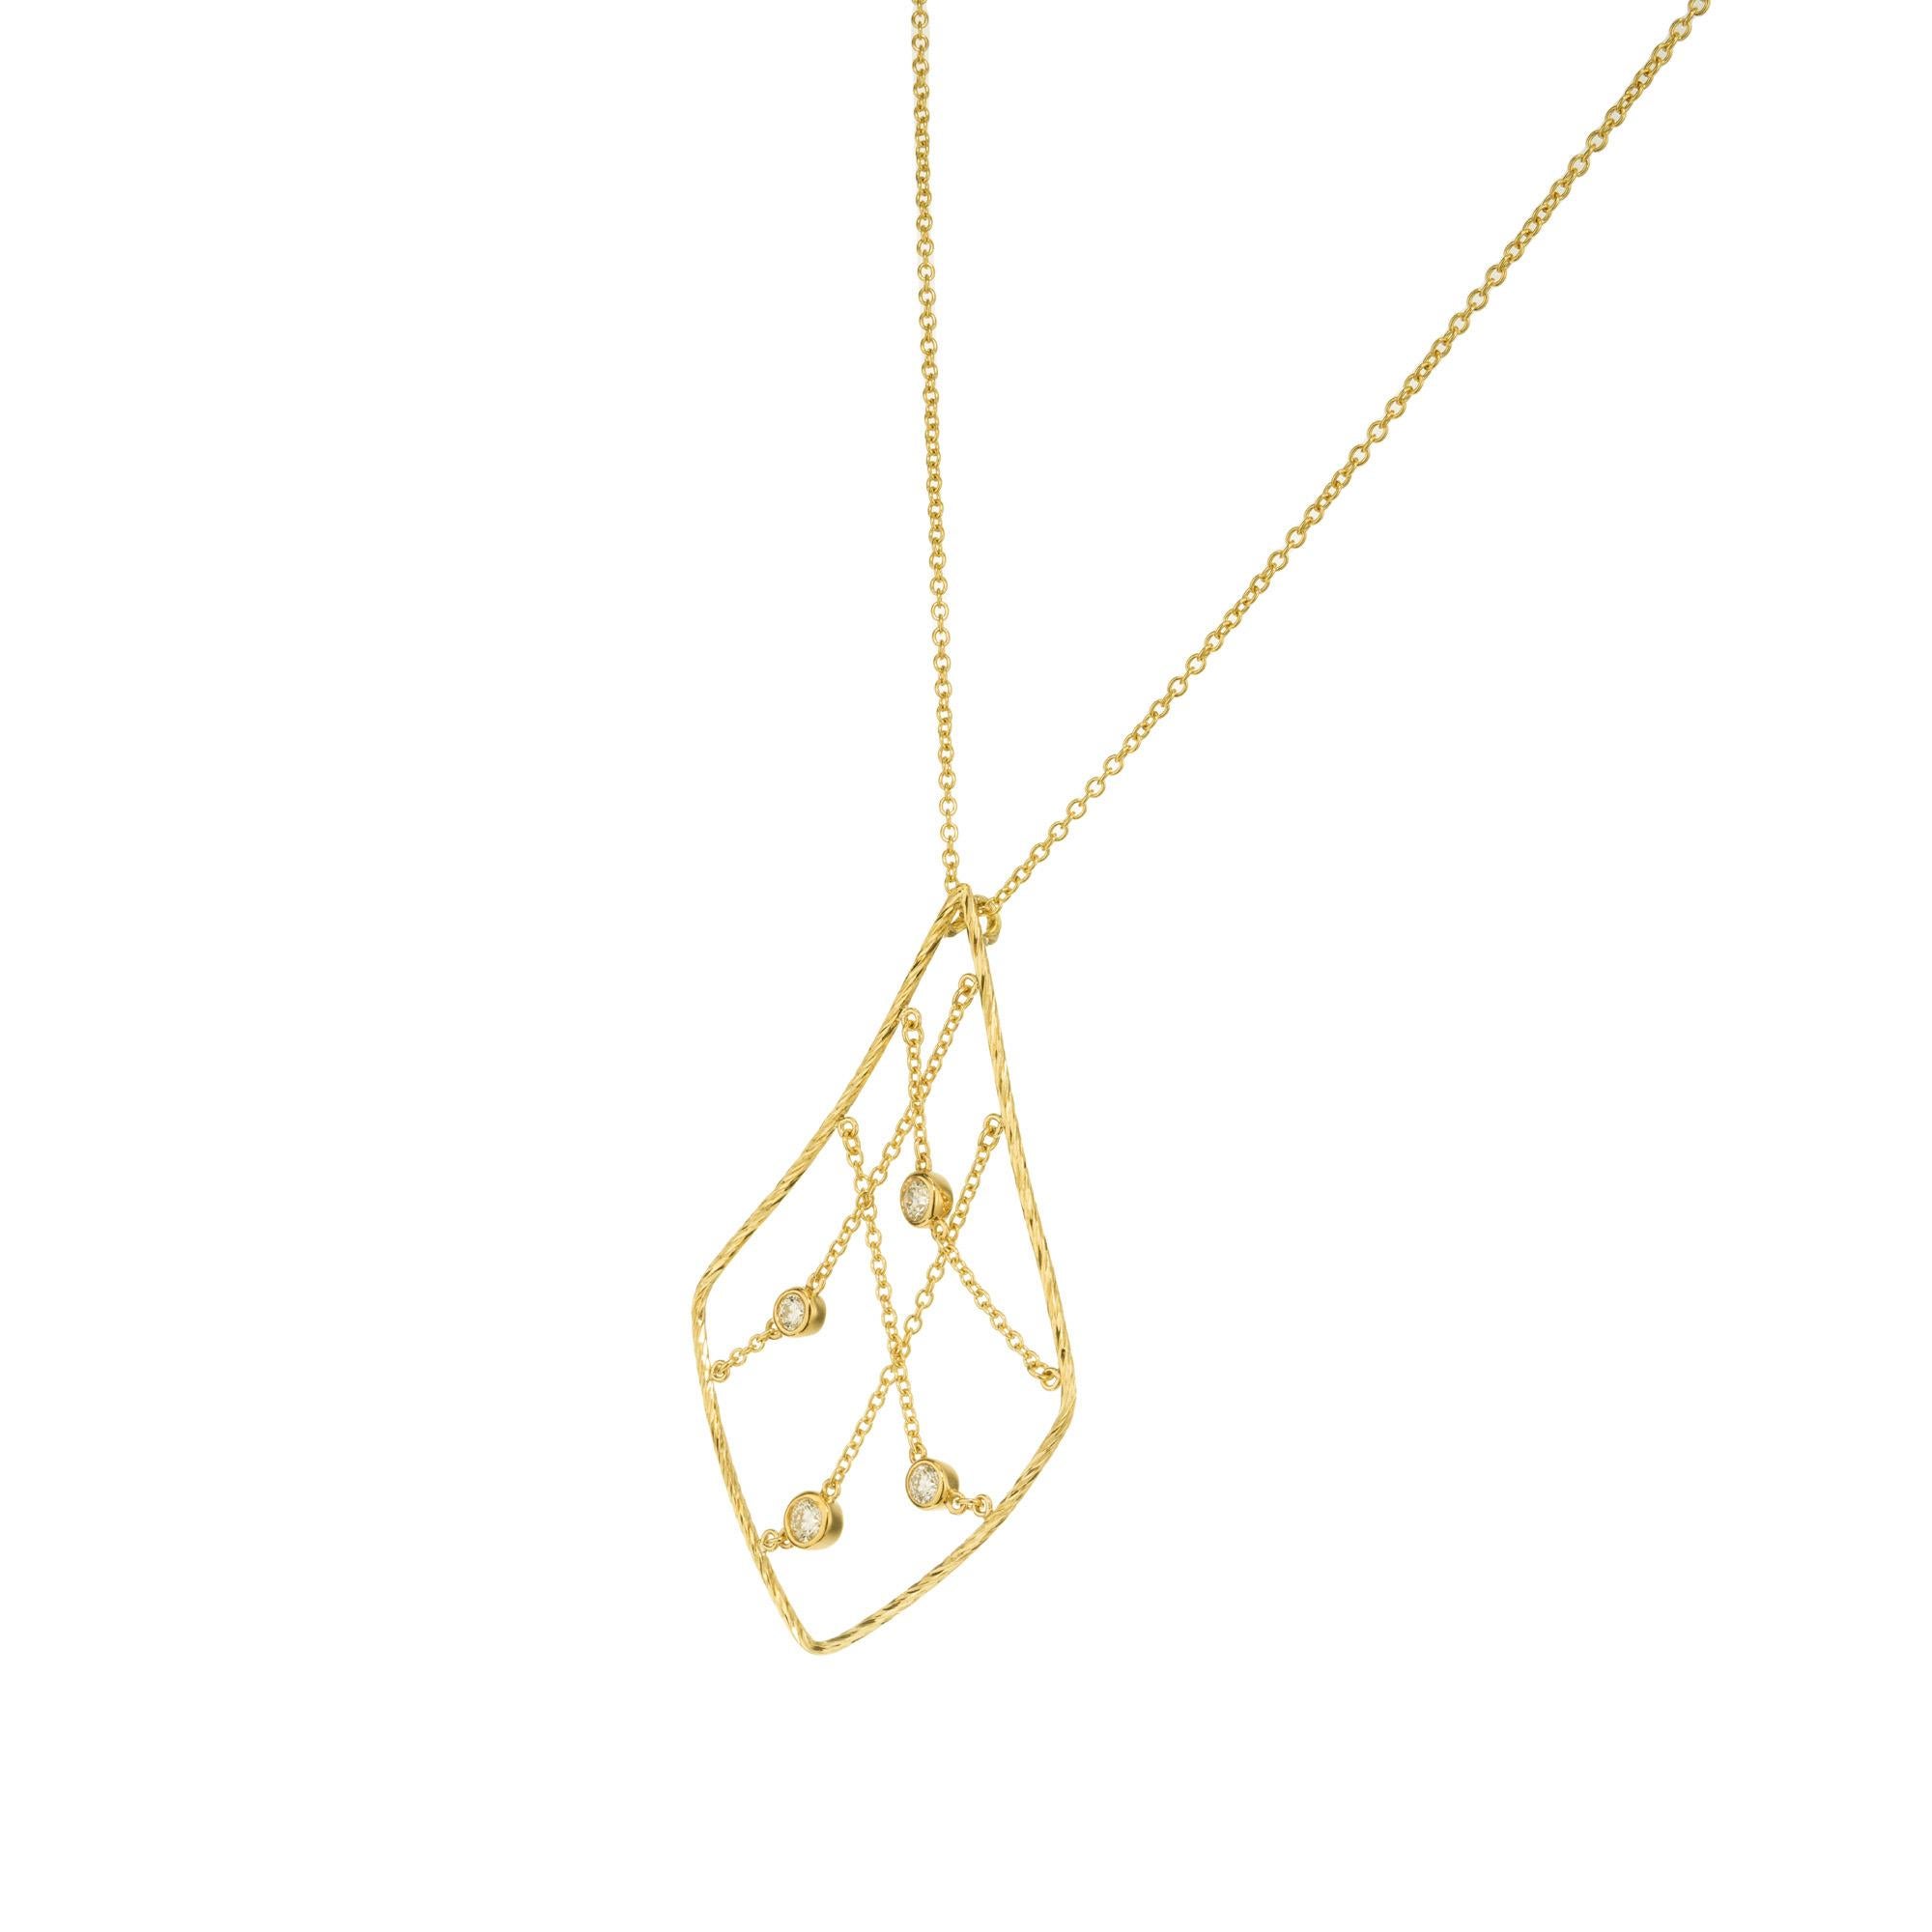 Round Cut Hearts On Fire .33 Carat Diamond Yellow Gold Pendant Necklace  For Sale